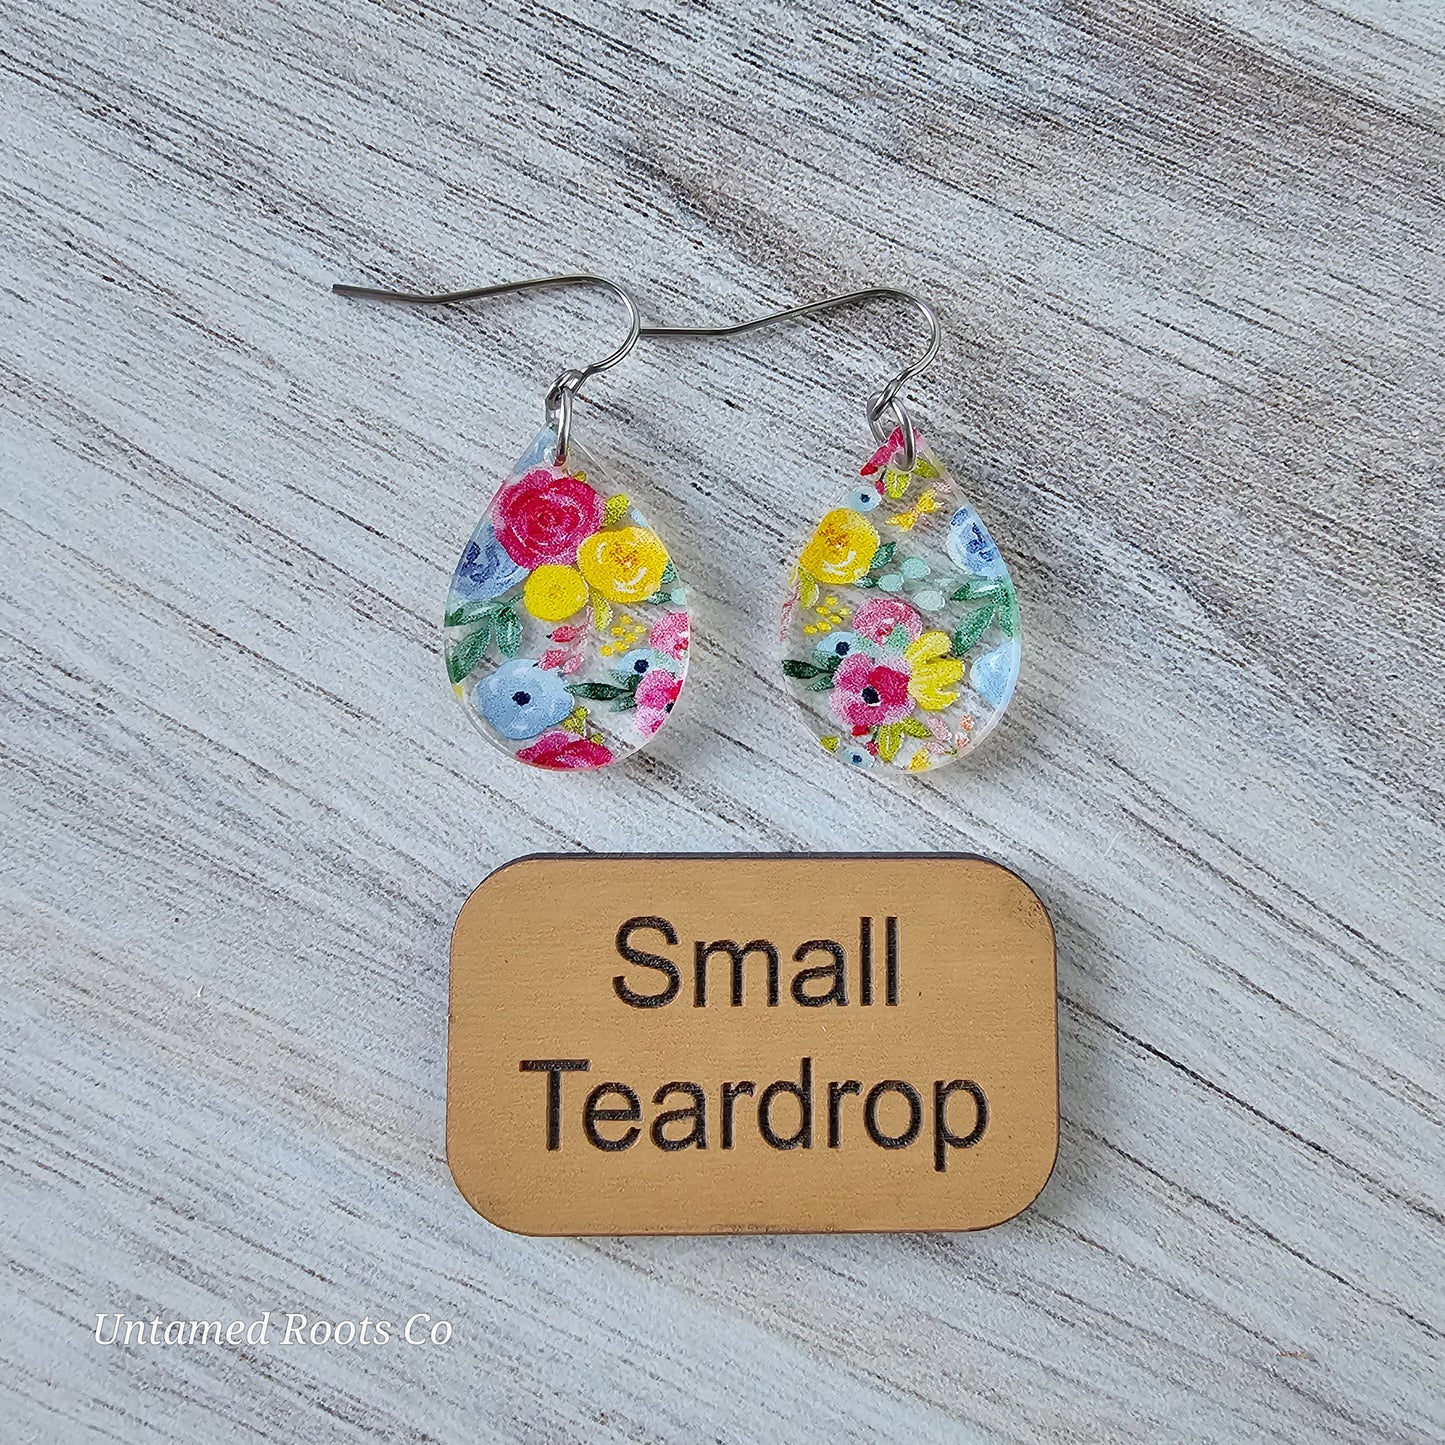 Sunny Floral Earrings (8 styles)